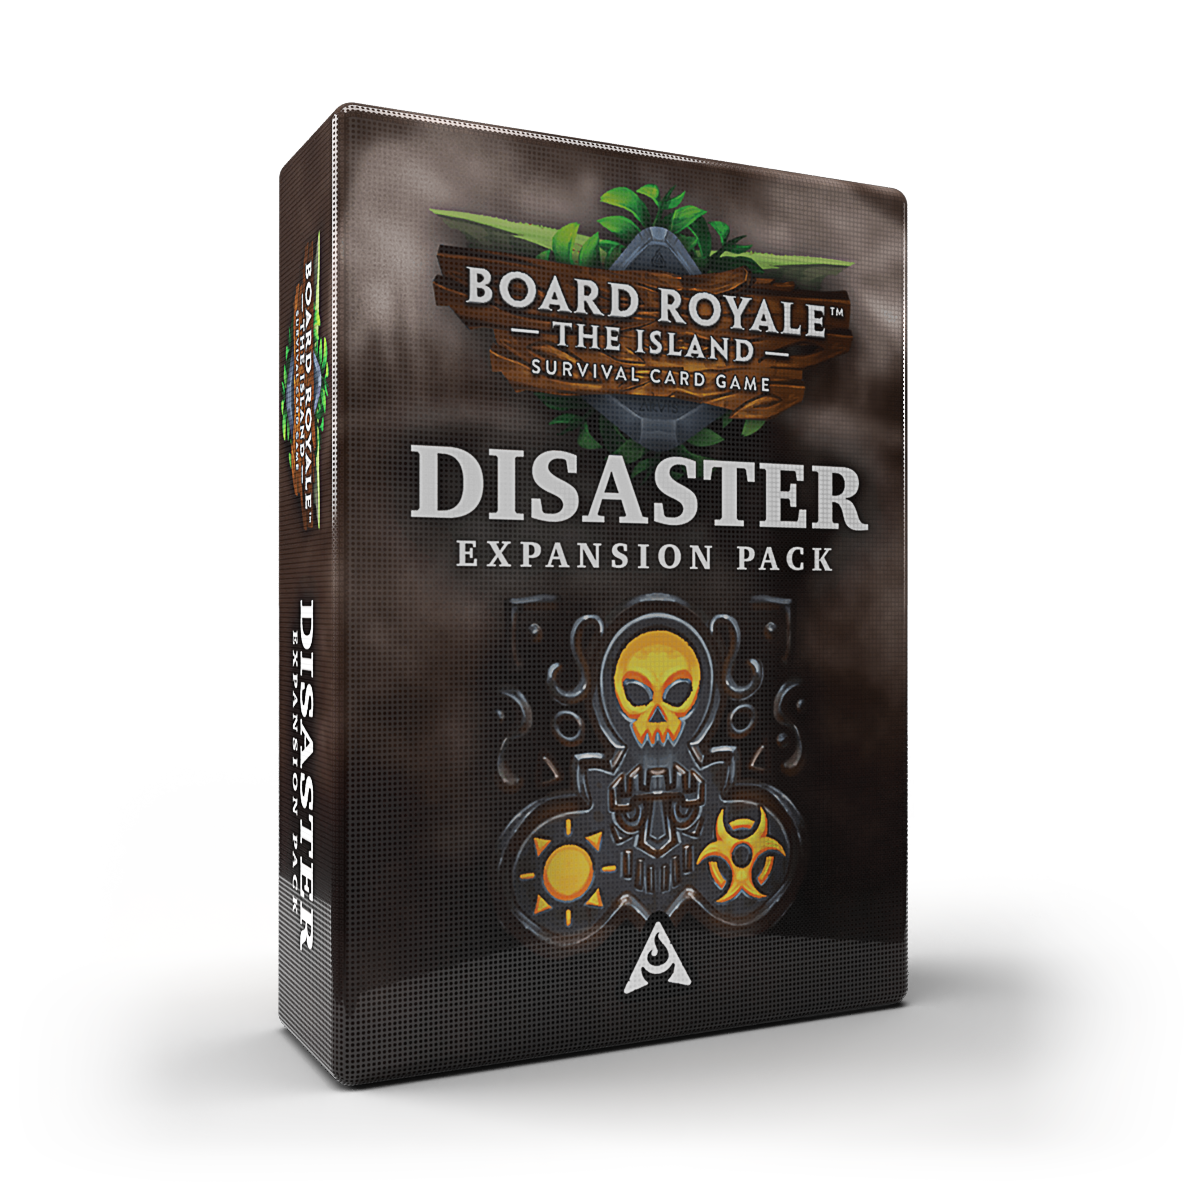 Board Royale - Disaster Expansion Pack